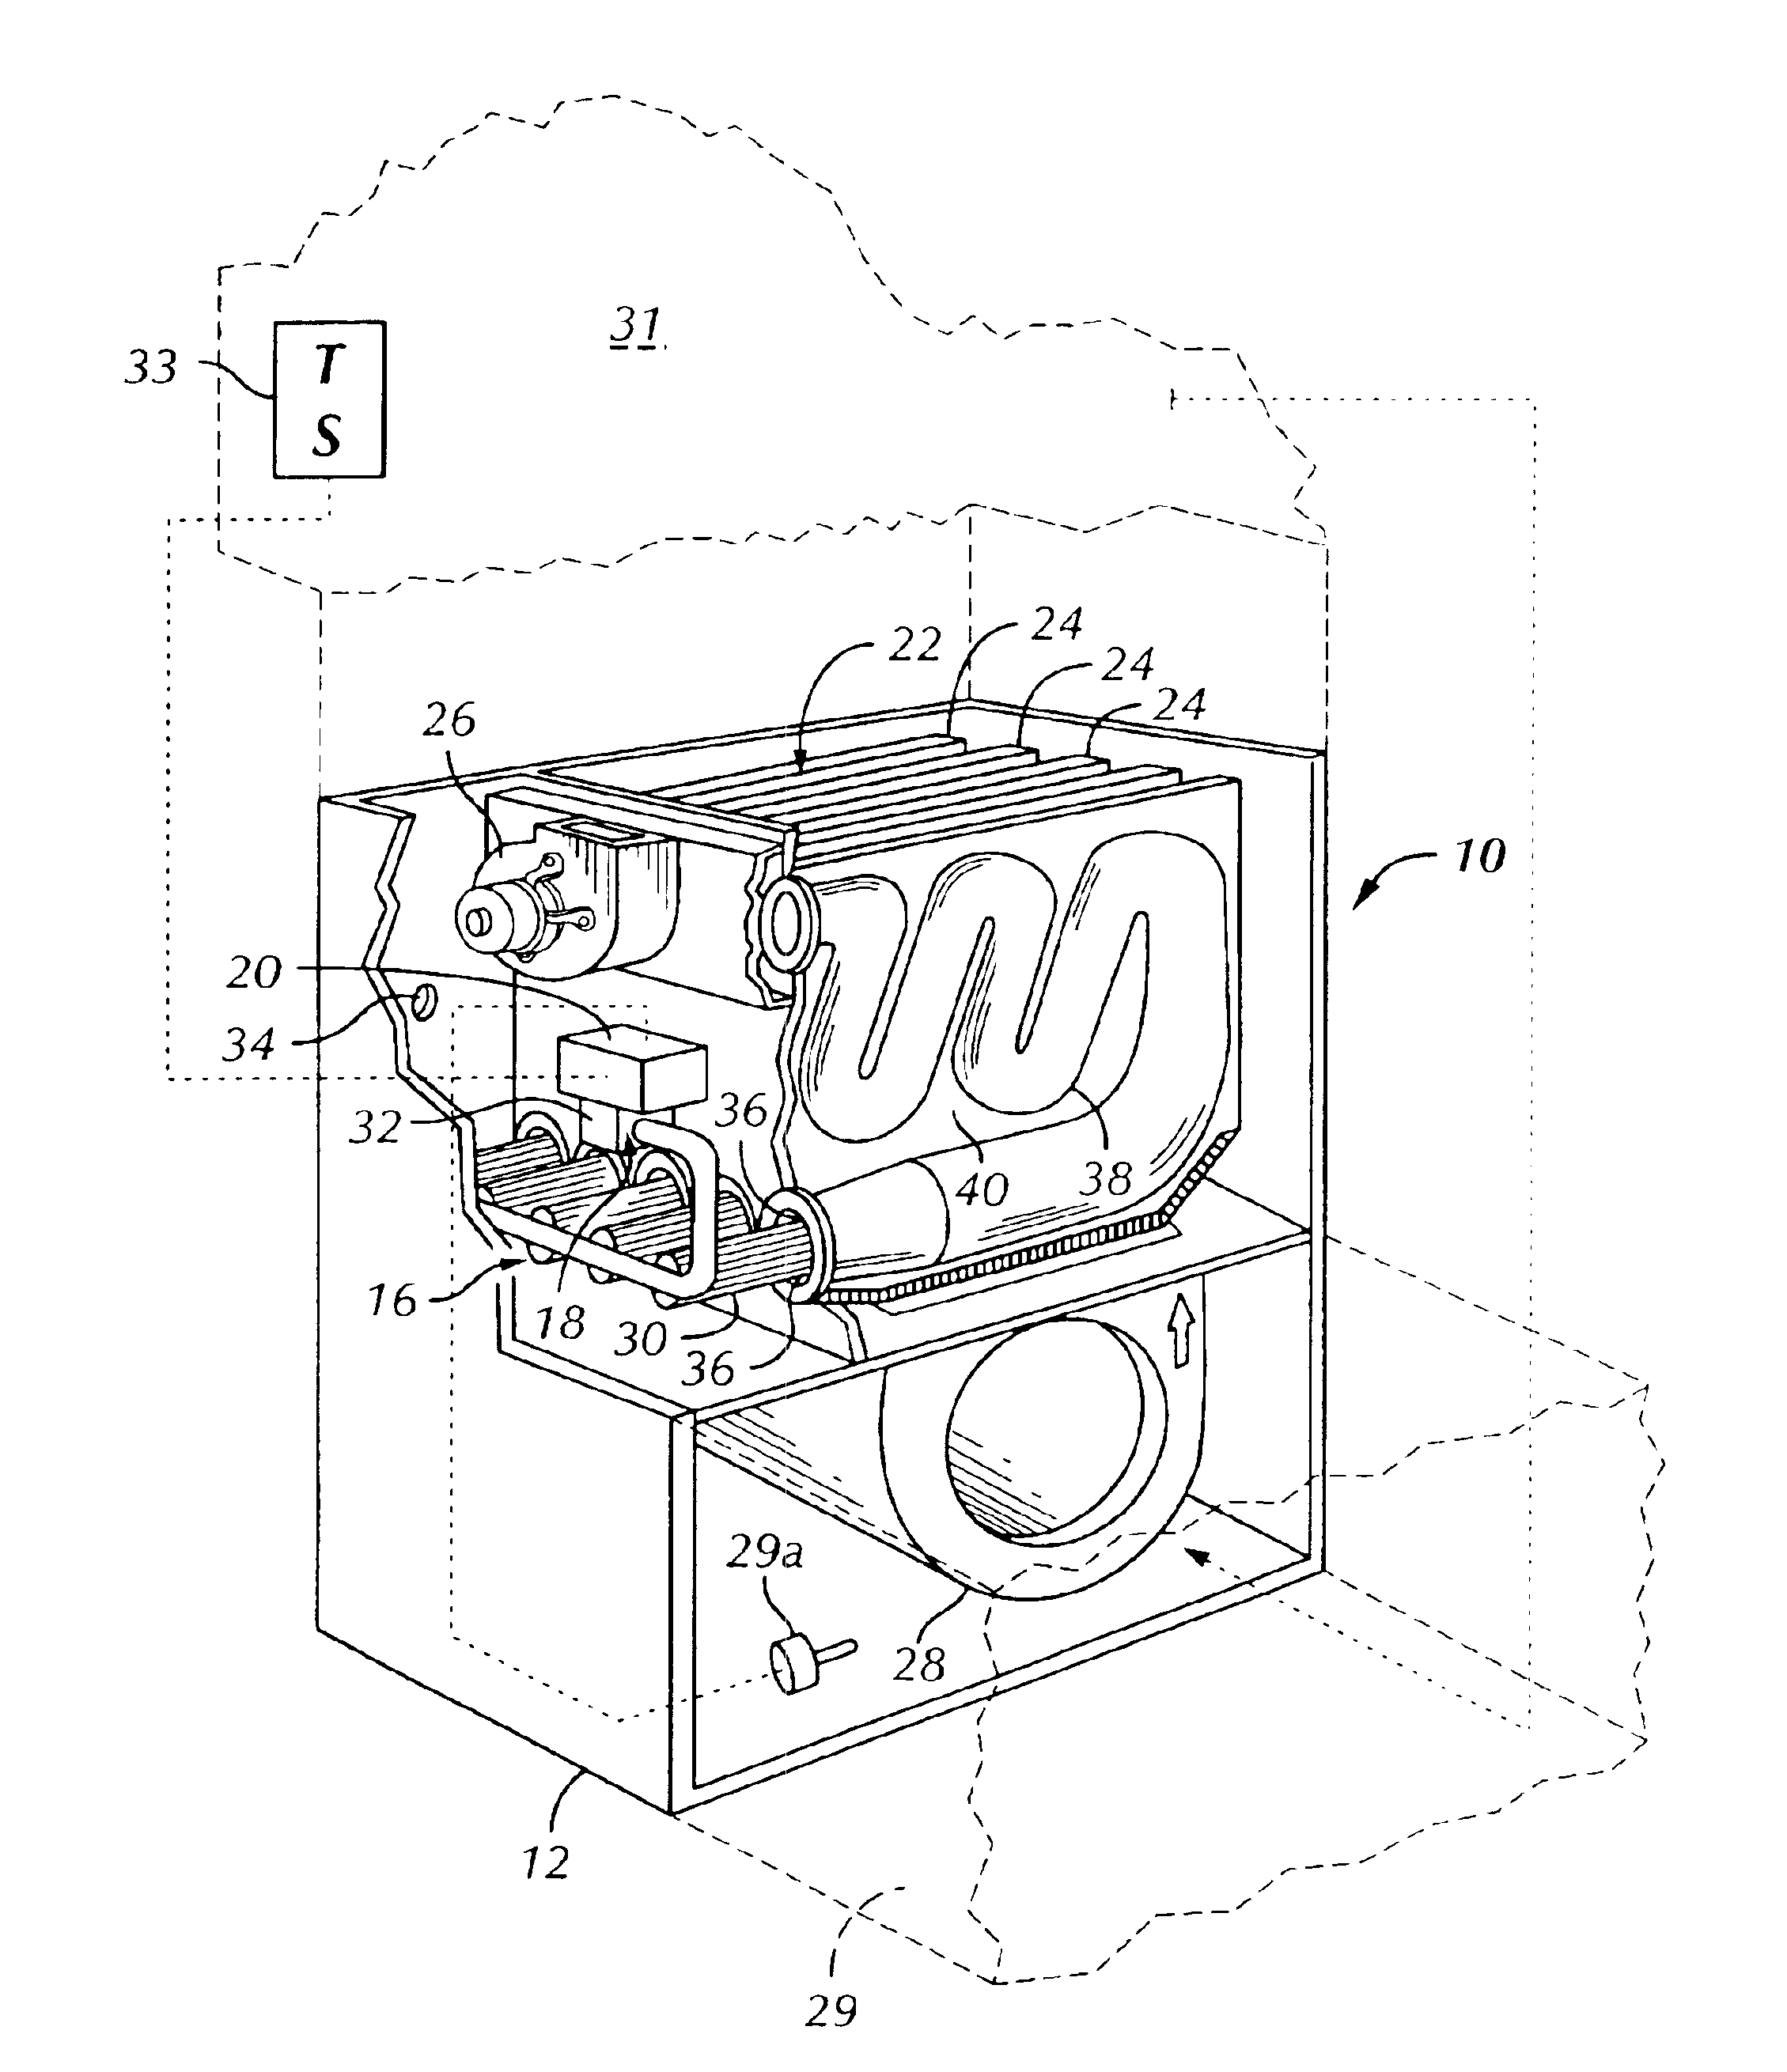 Multistage warm air furnace with single stage thermostat and return air sensor and method of operating same